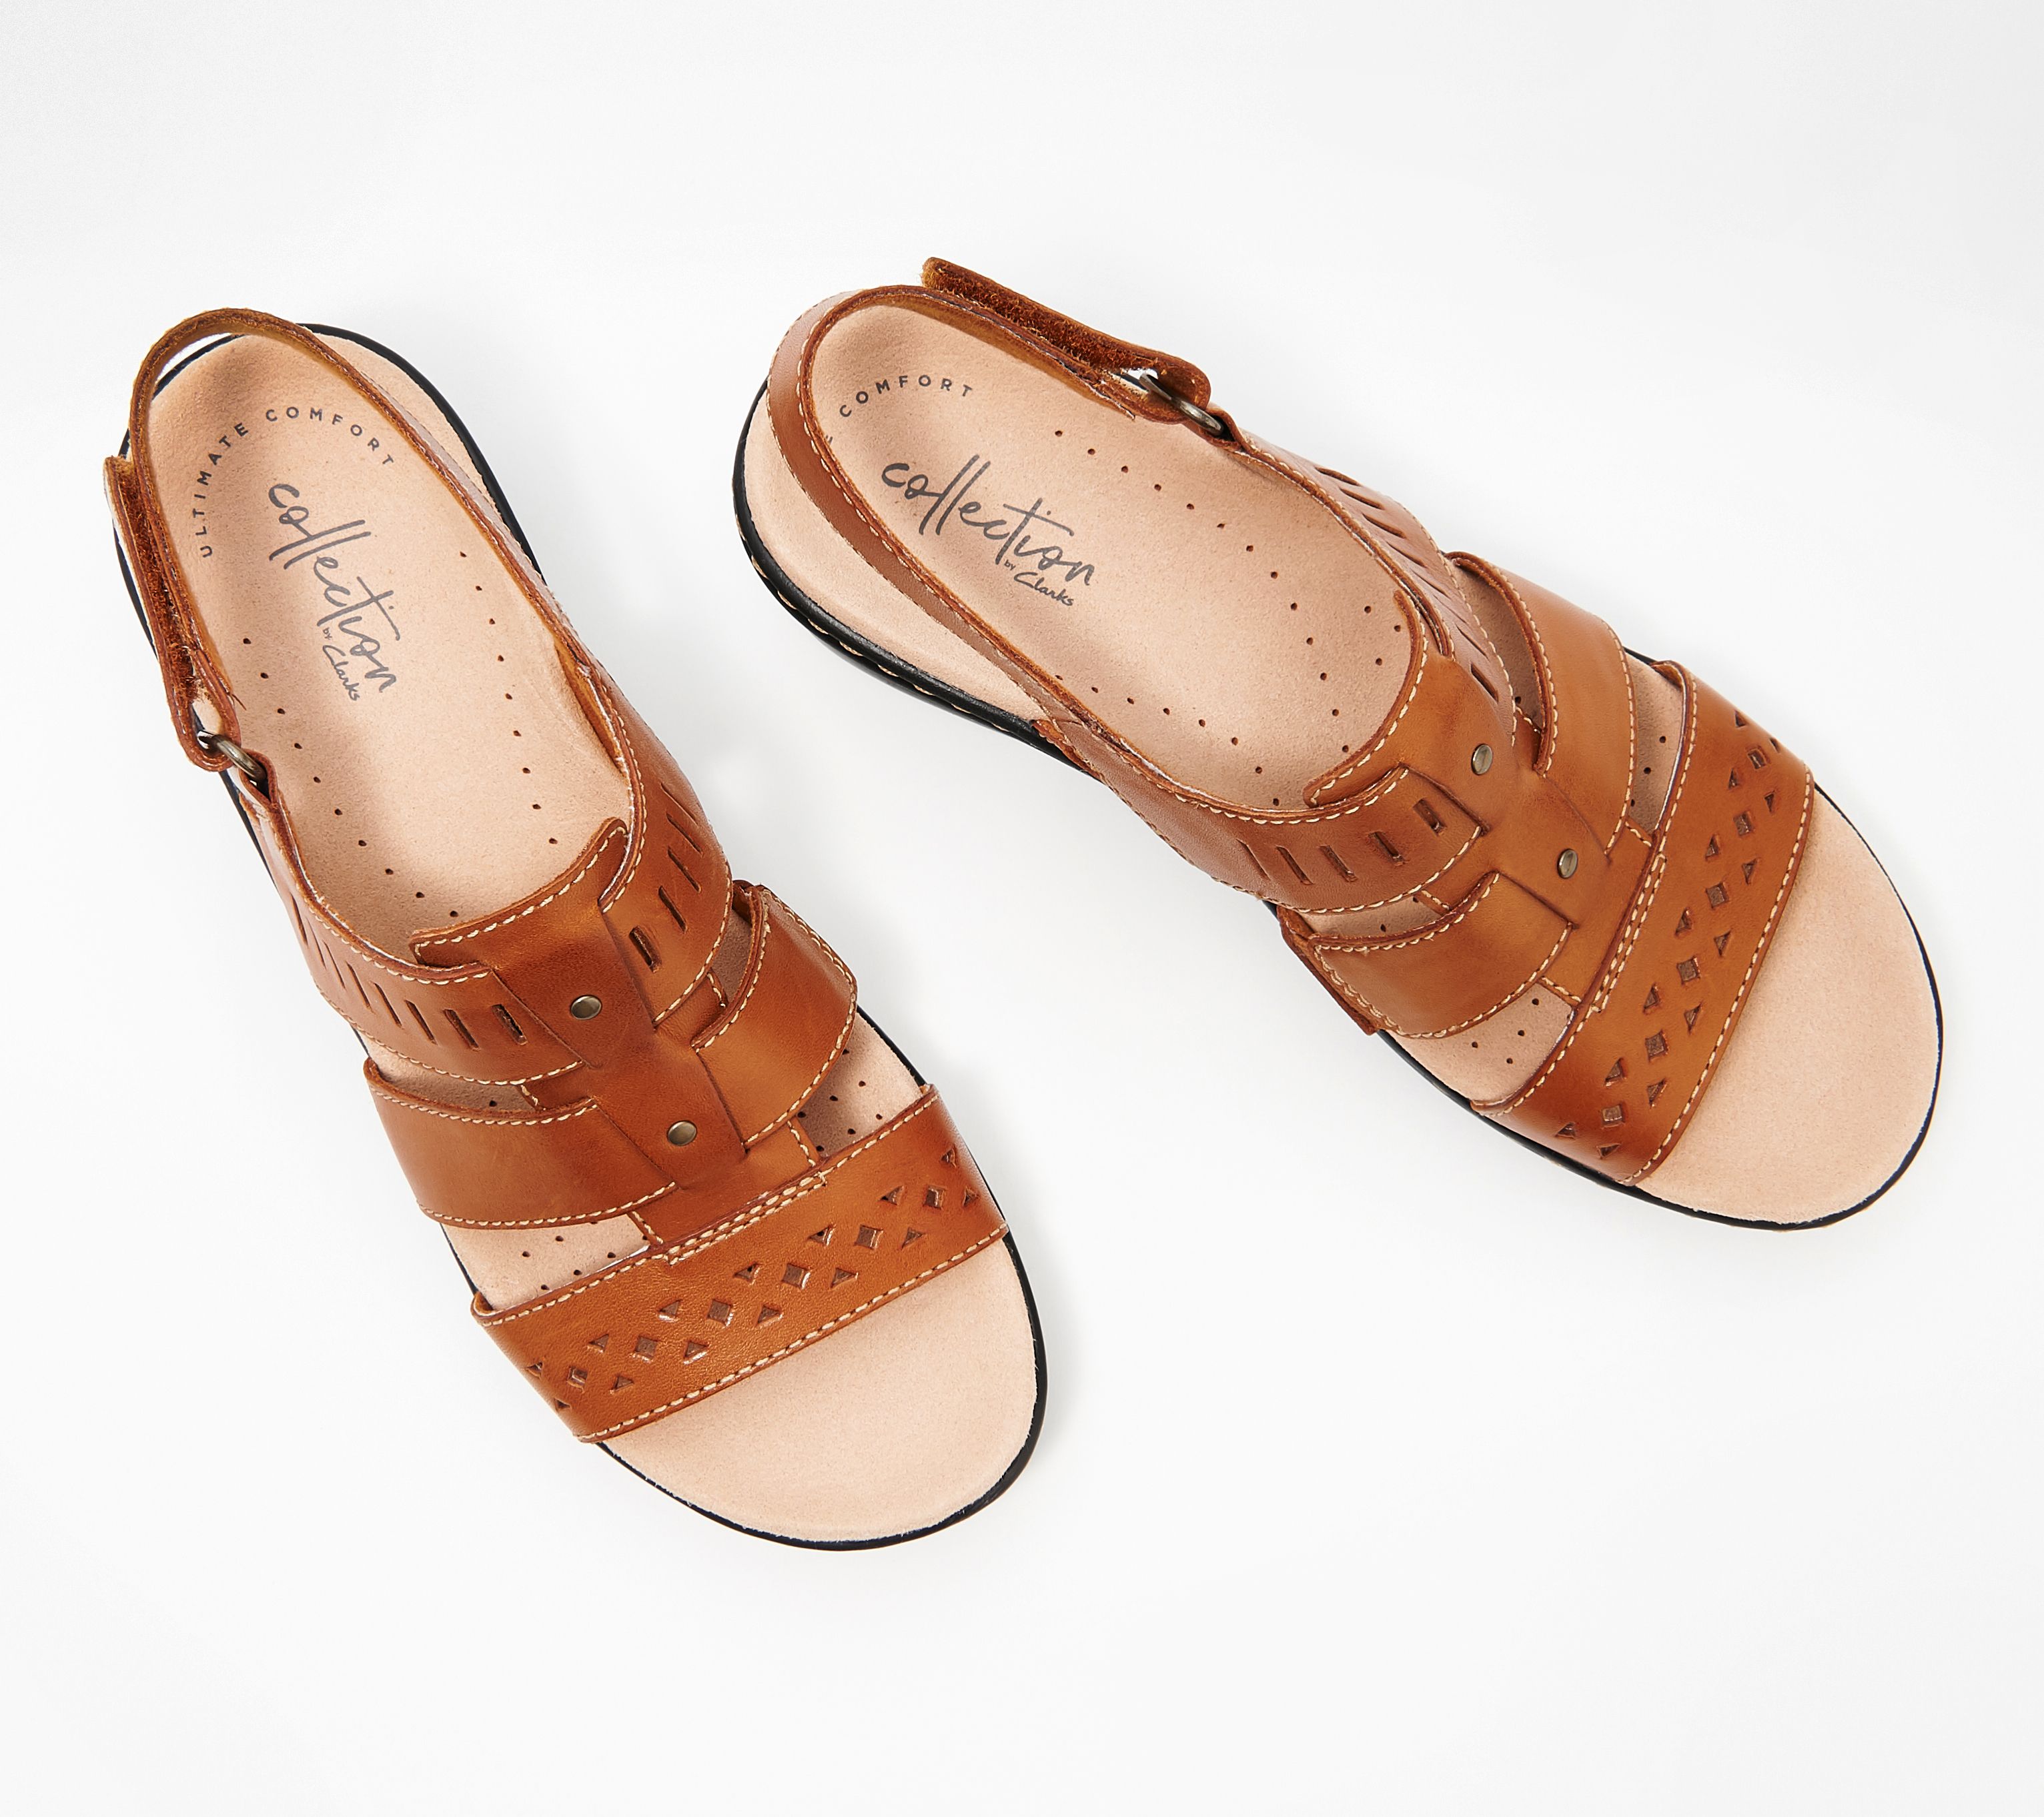 Leather Cut-Out Sandals Lexi Qwin Tan Brown Details about  / Clarks Collection 6.5 M